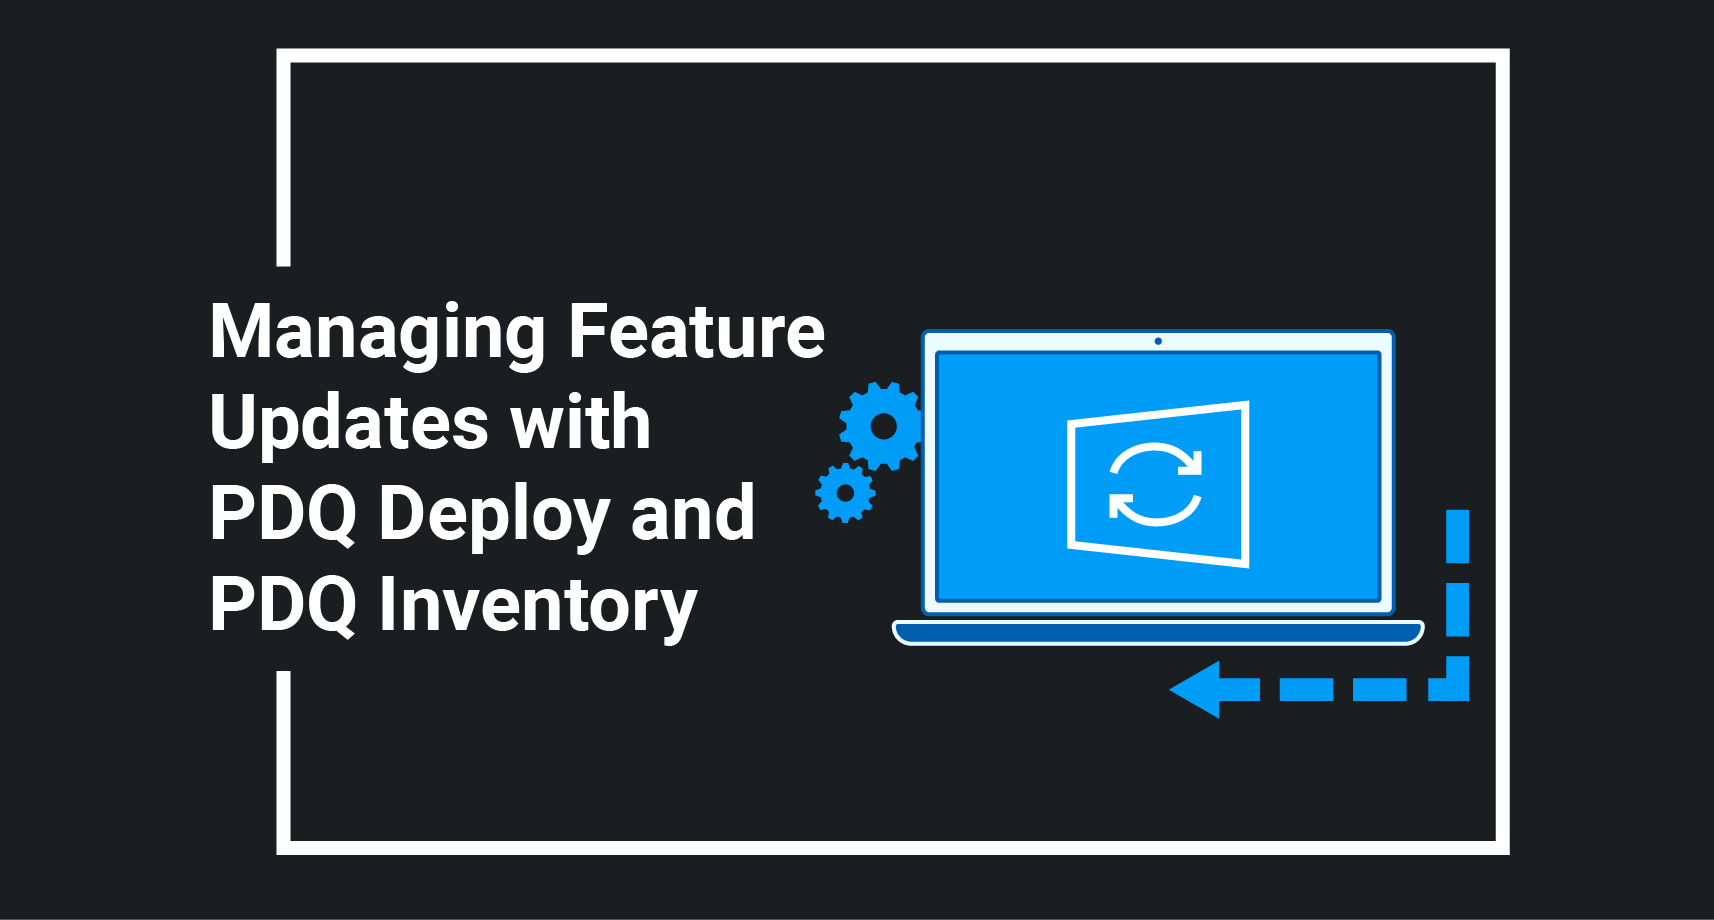 PDQ Inventory Enterprise 19.3.464.0 download the new version for apple